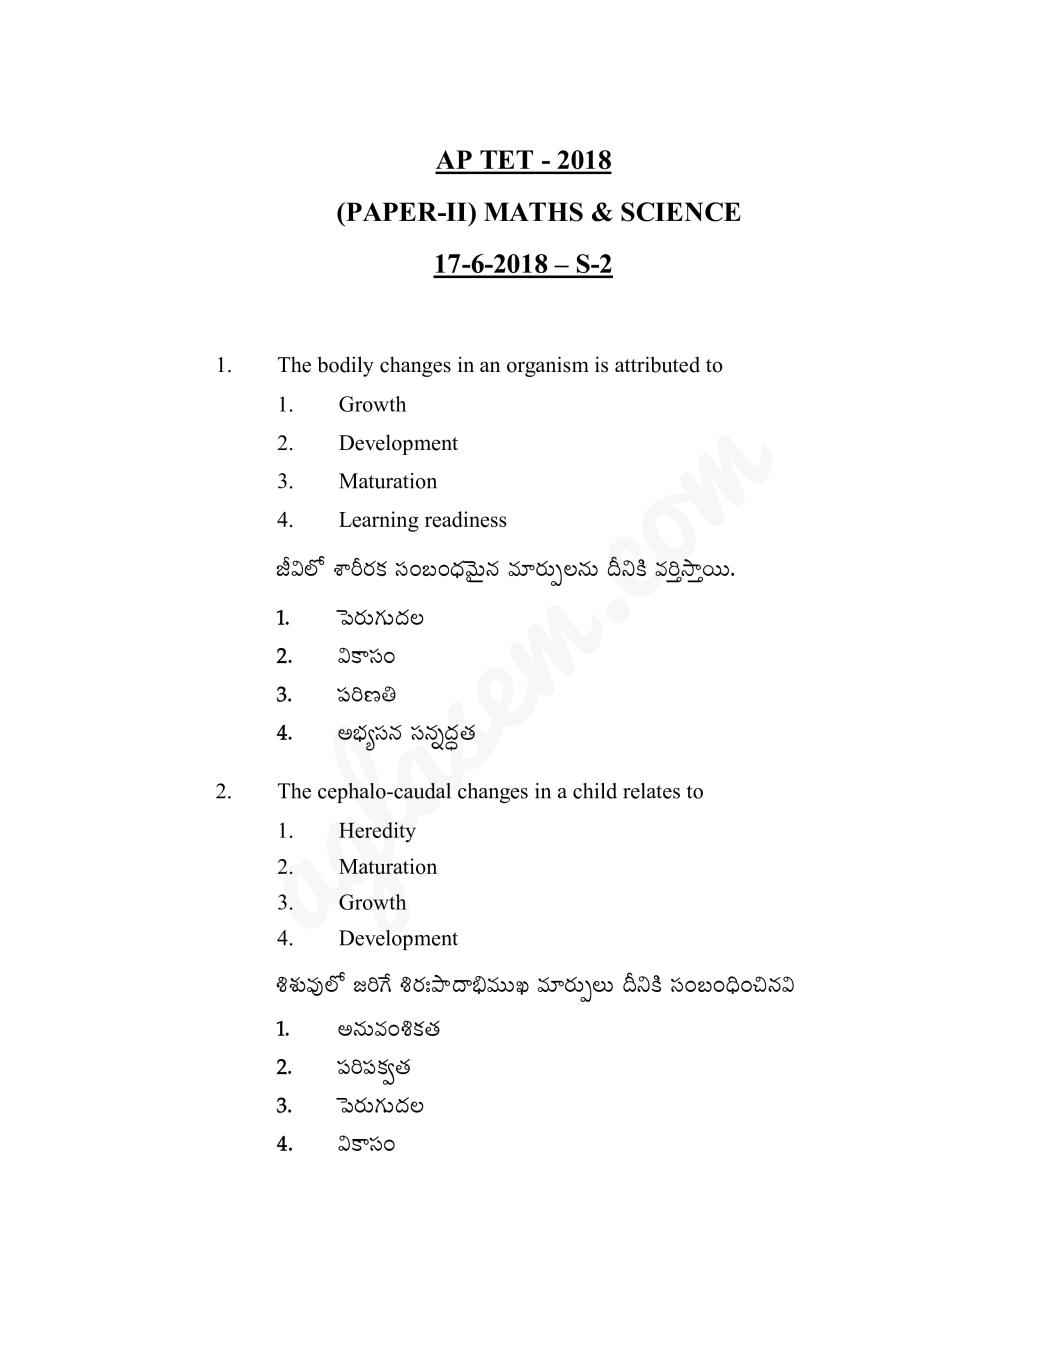 APTET Question Paper with Answers 17 Jun 2018 Paper 2 Maths and Science (Shift 2) - Page 1